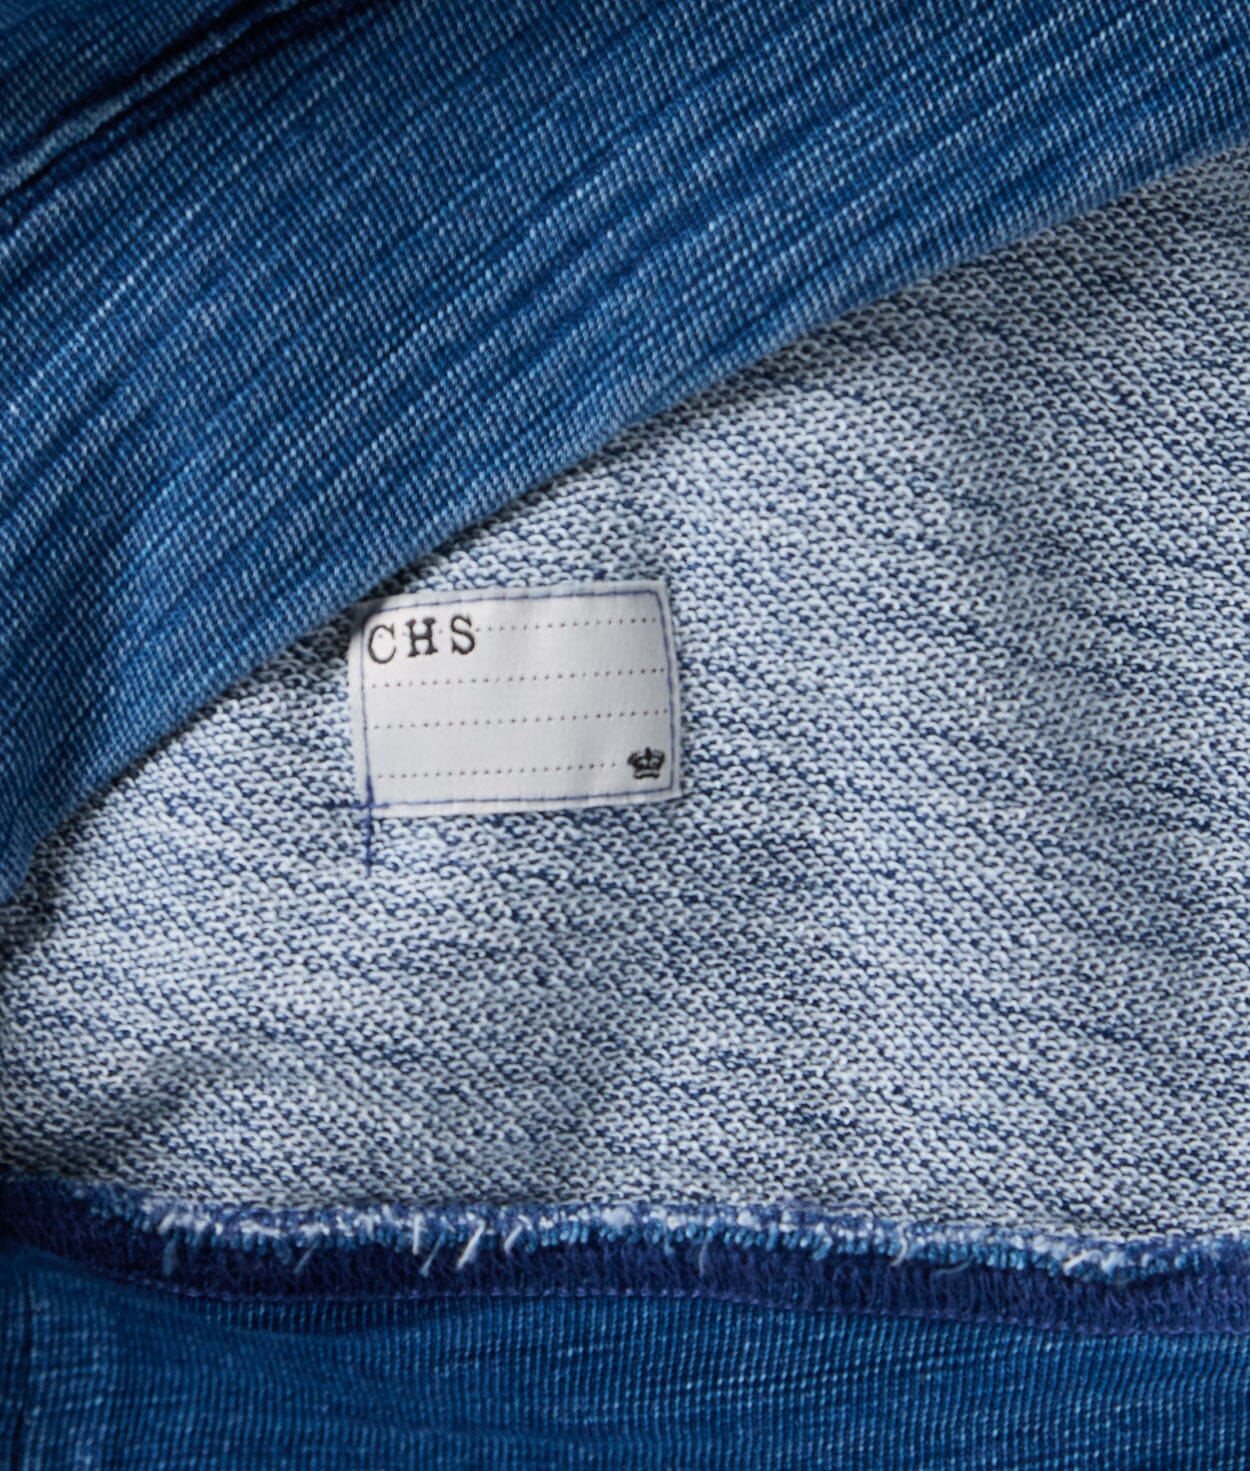 Close Up of Hidden Name Label in Interior of Garment